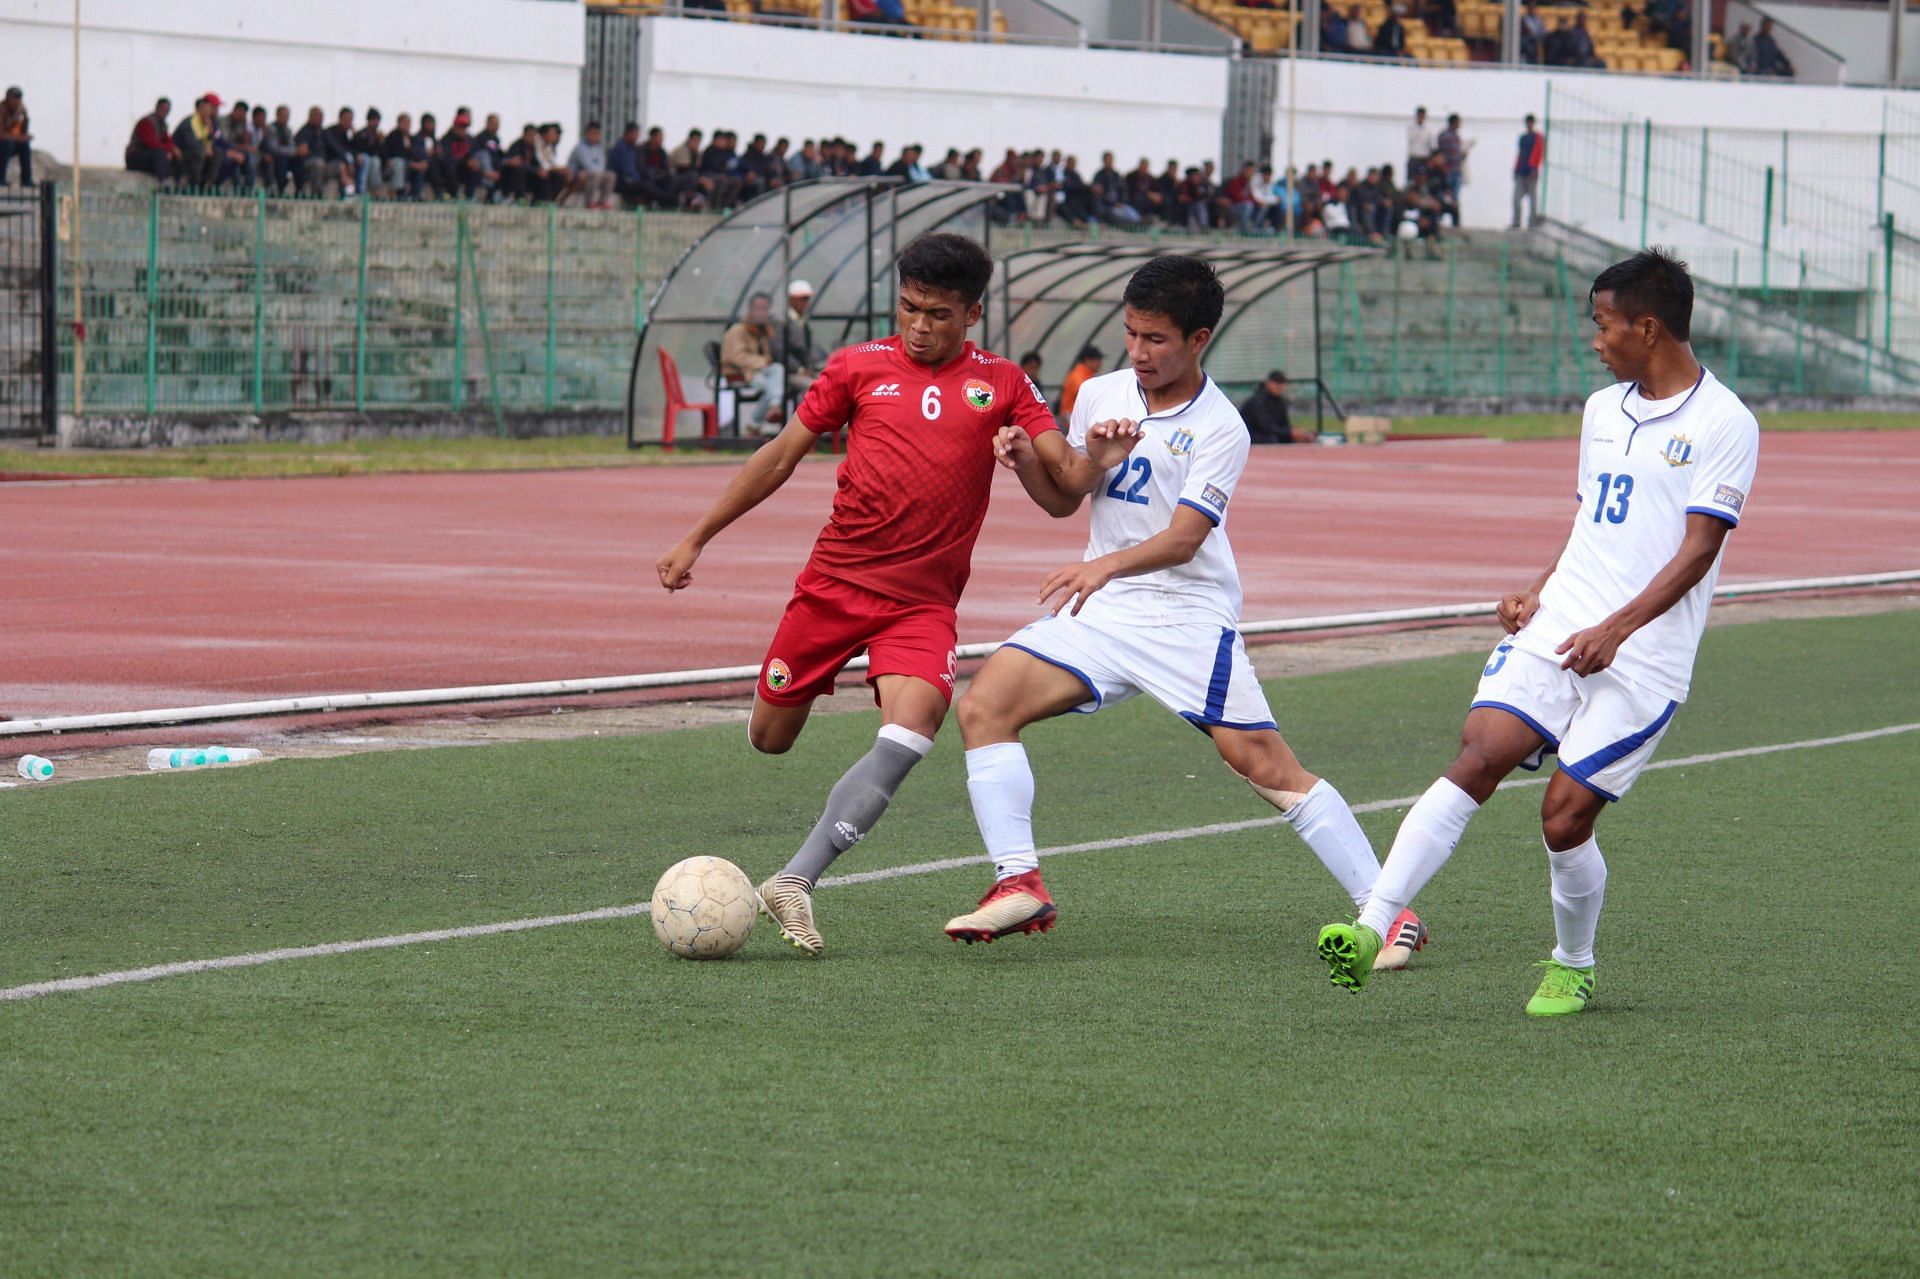 Kyngsai Khongsit is one of the vital cogs in the wheel for Shillong Lajong.